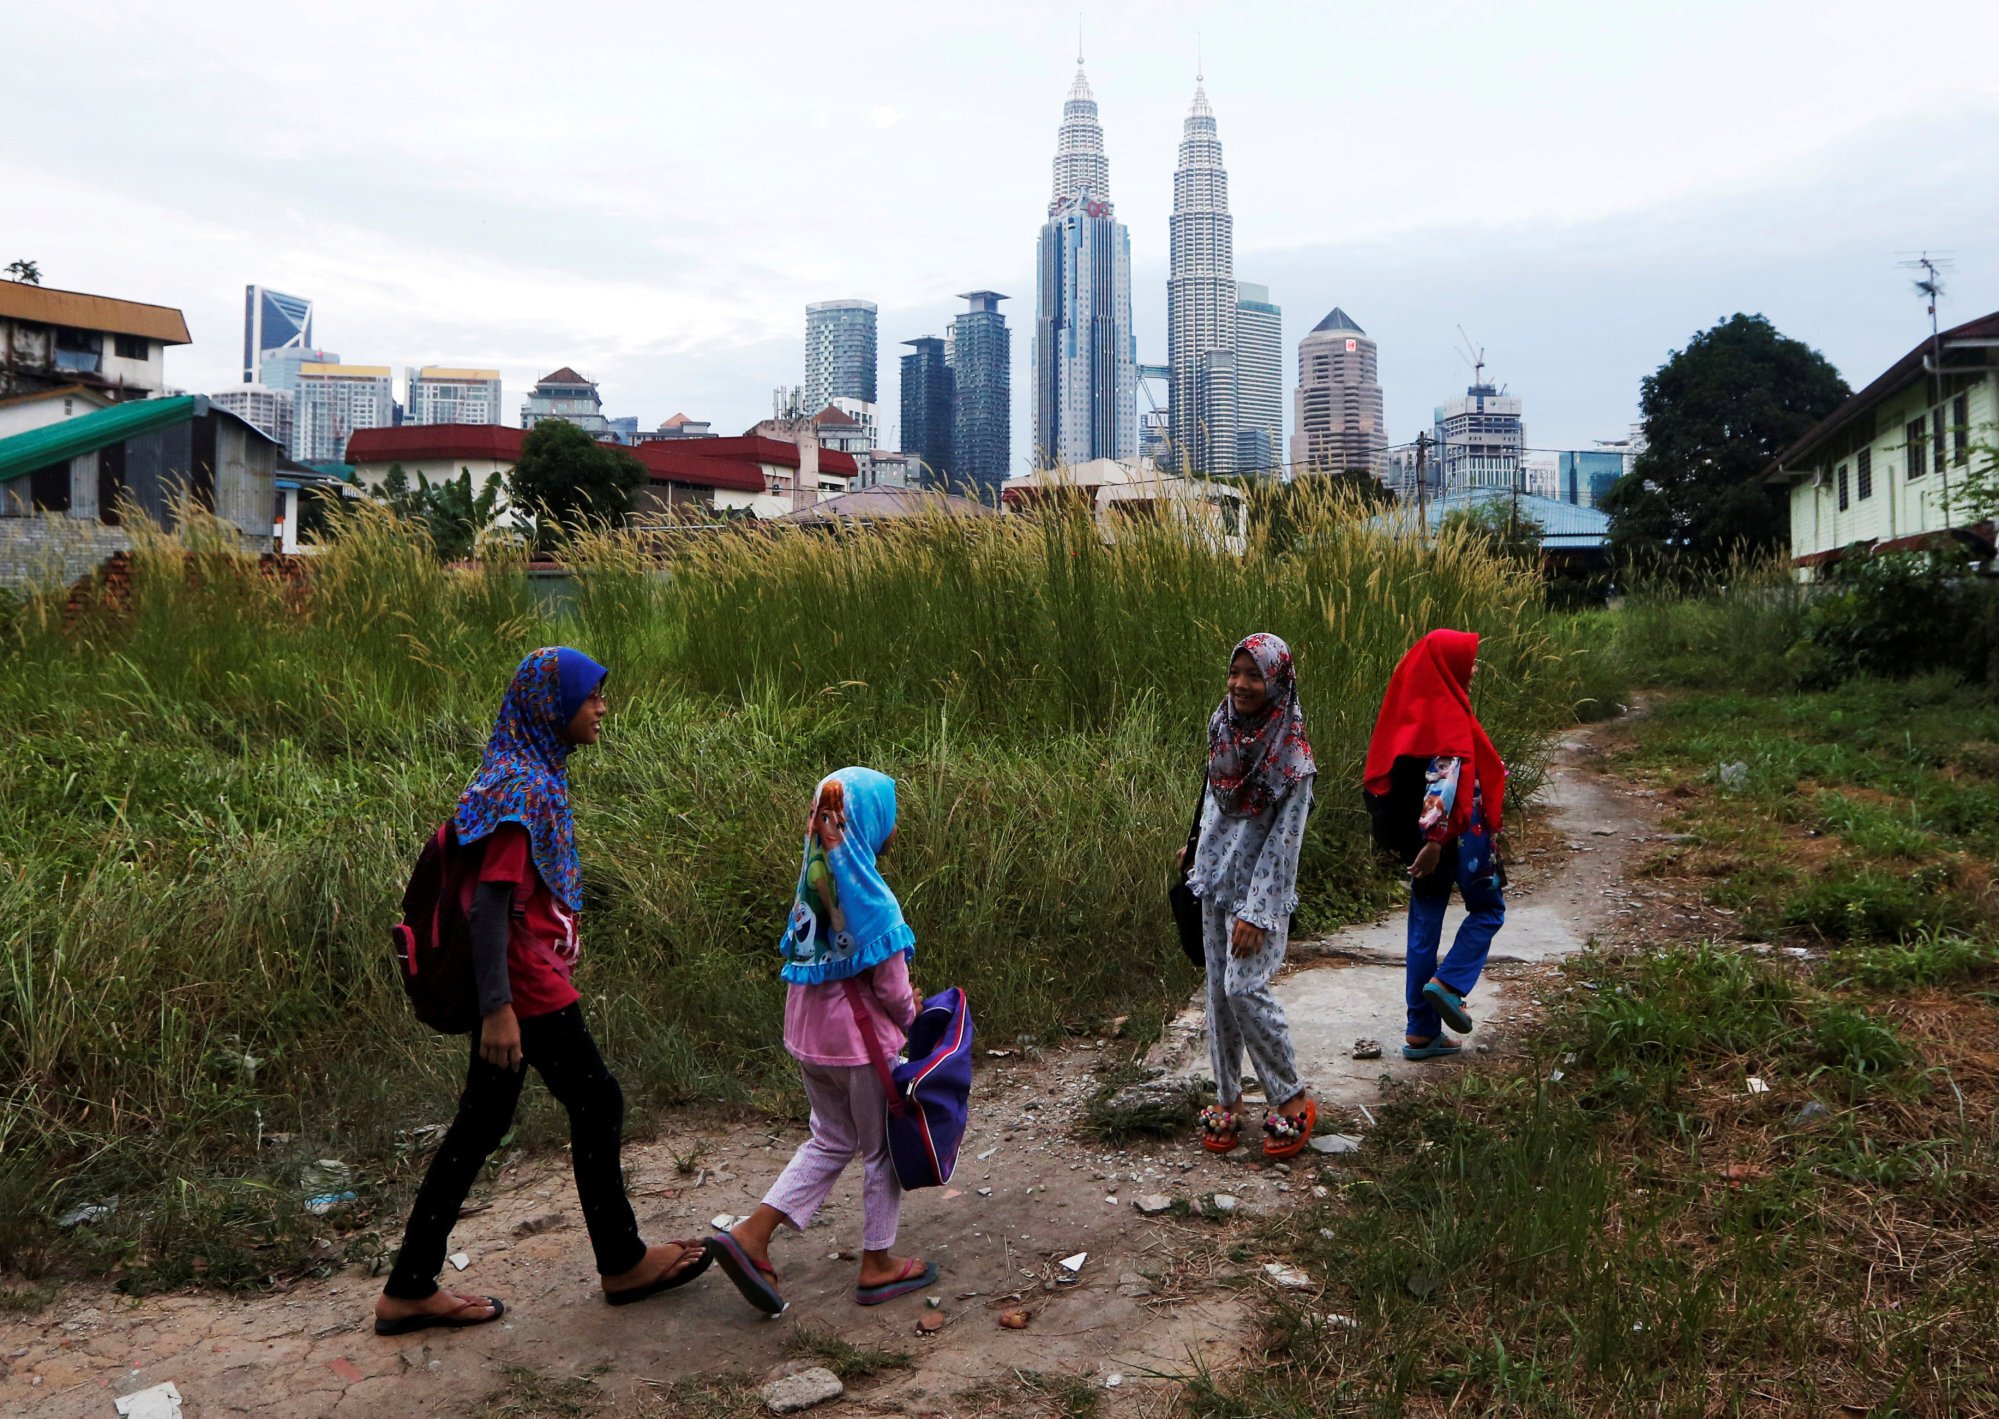 Children make their way home after school in Kuala Lumpur. File photo: Reuters